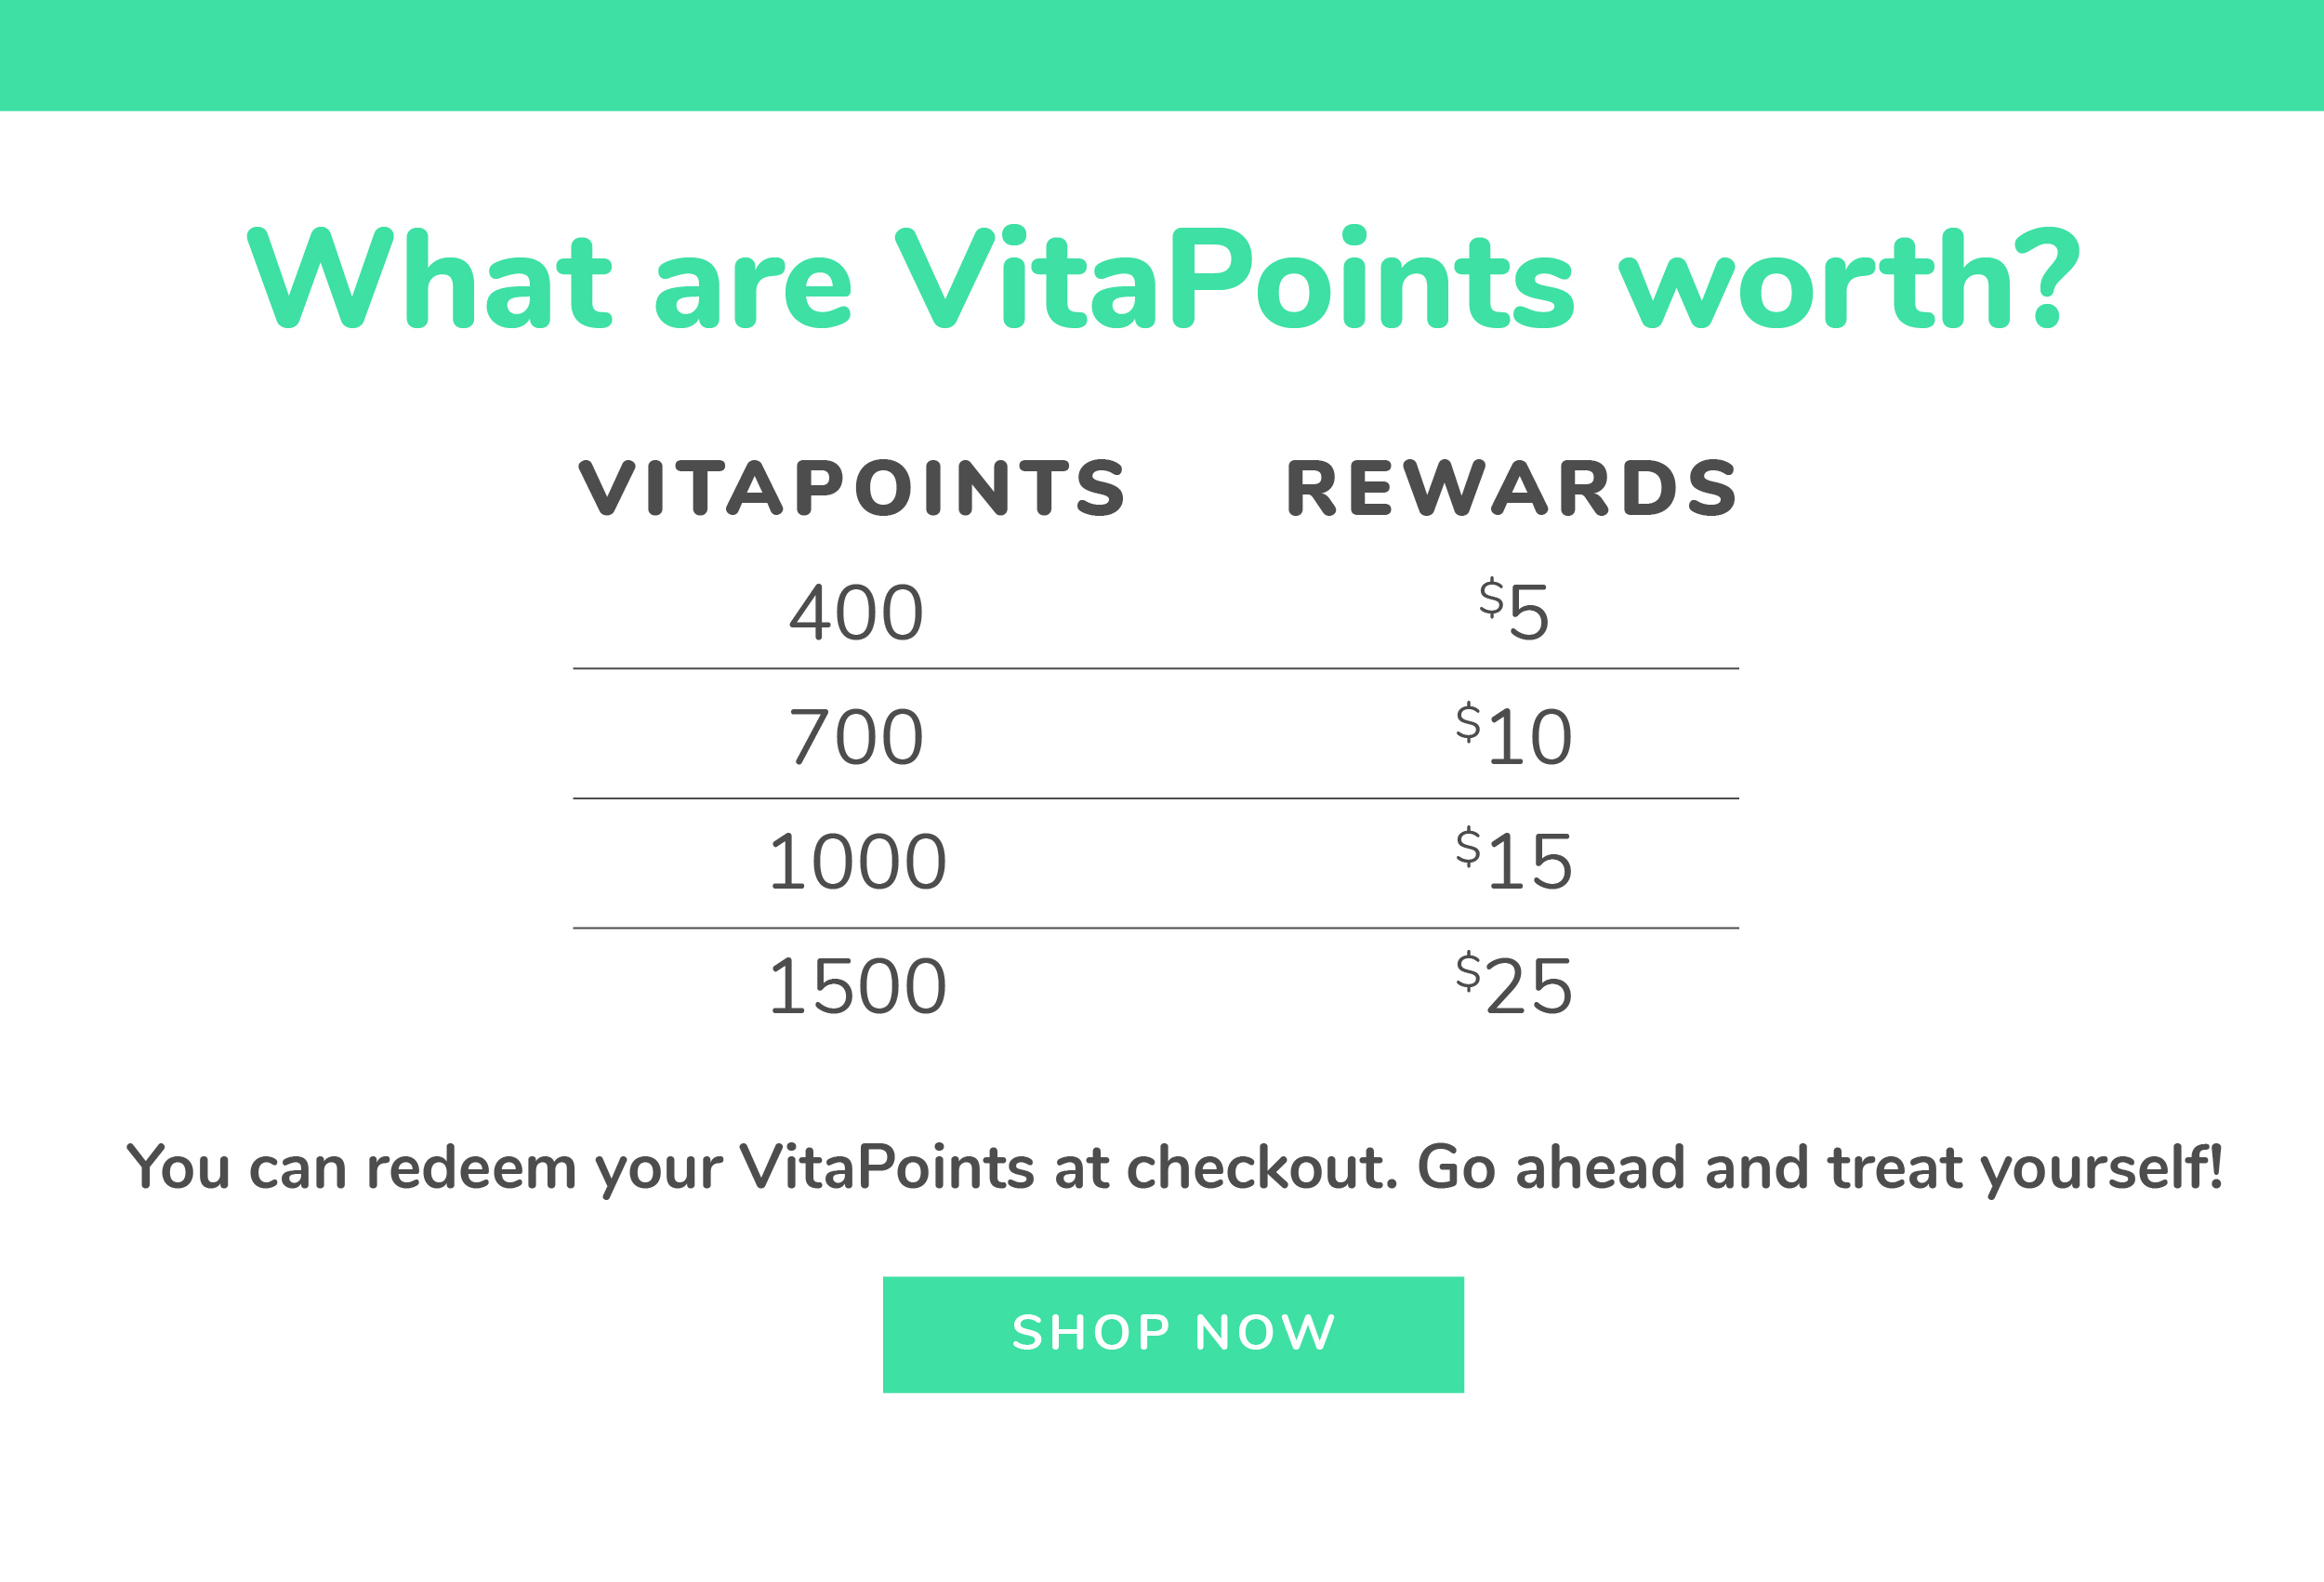 You can redeem your VitaPoints at checkout. Go ahead and treat yourself! SHOP NOW